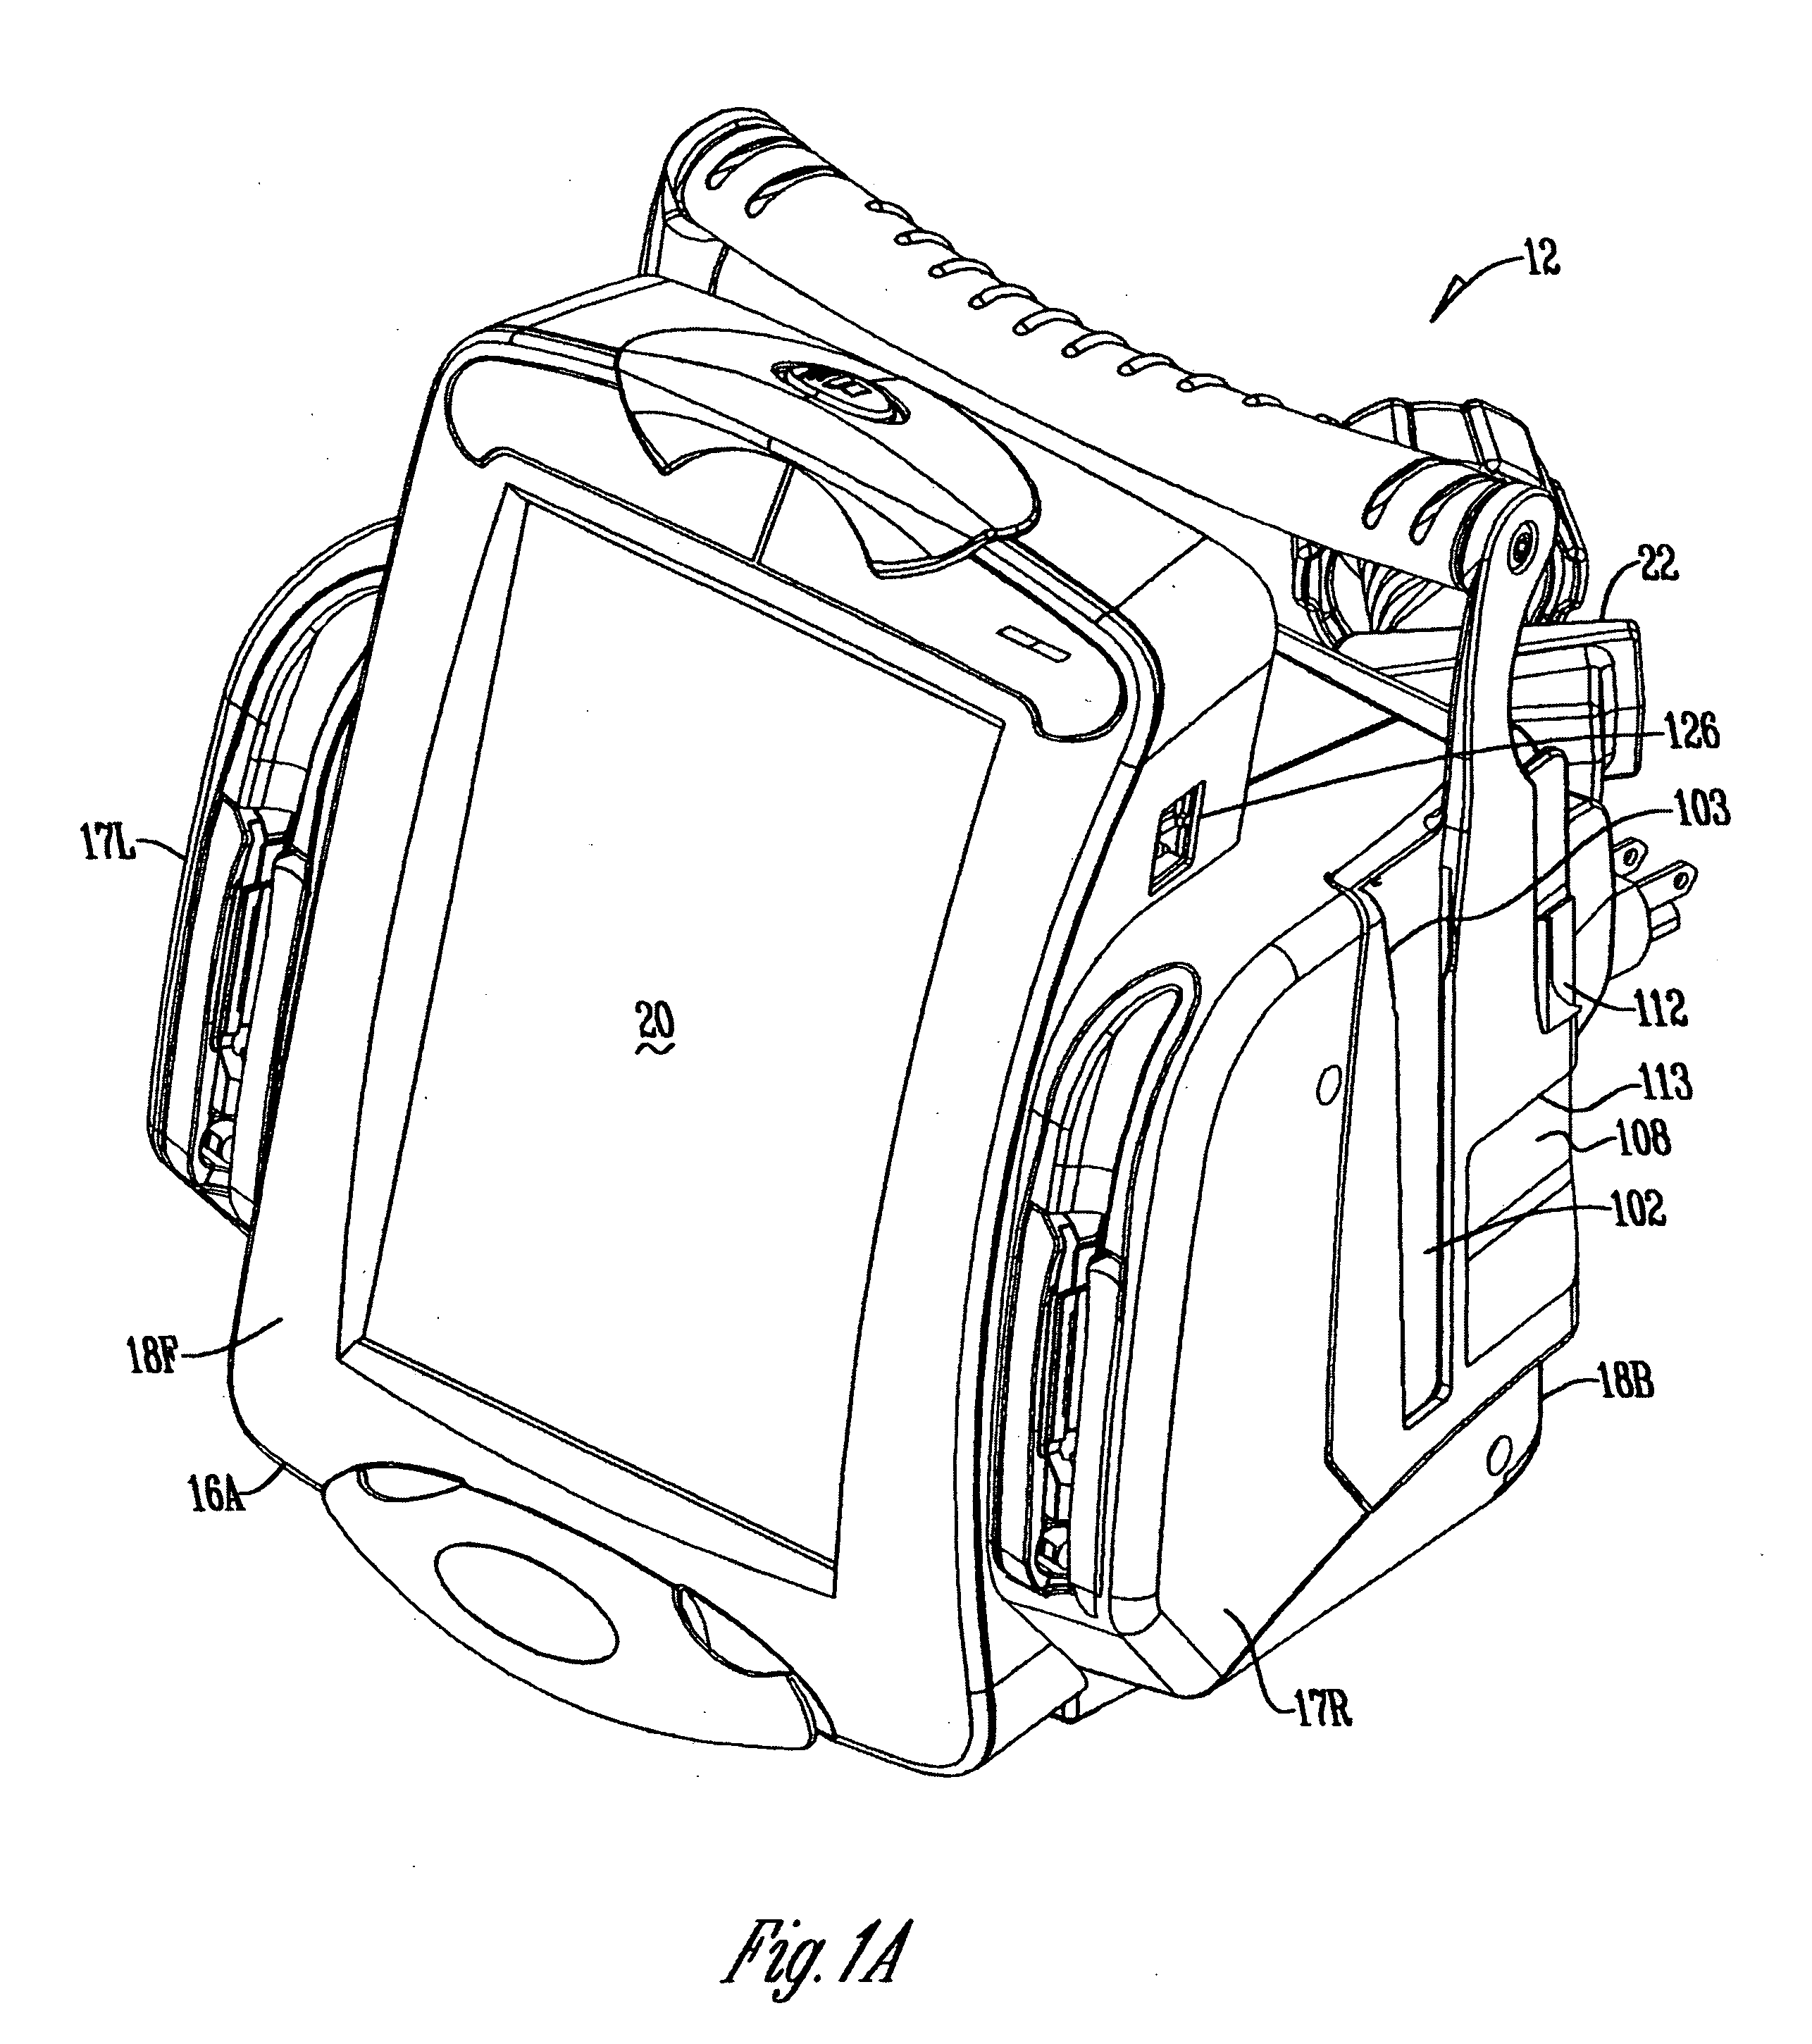 Medical device system